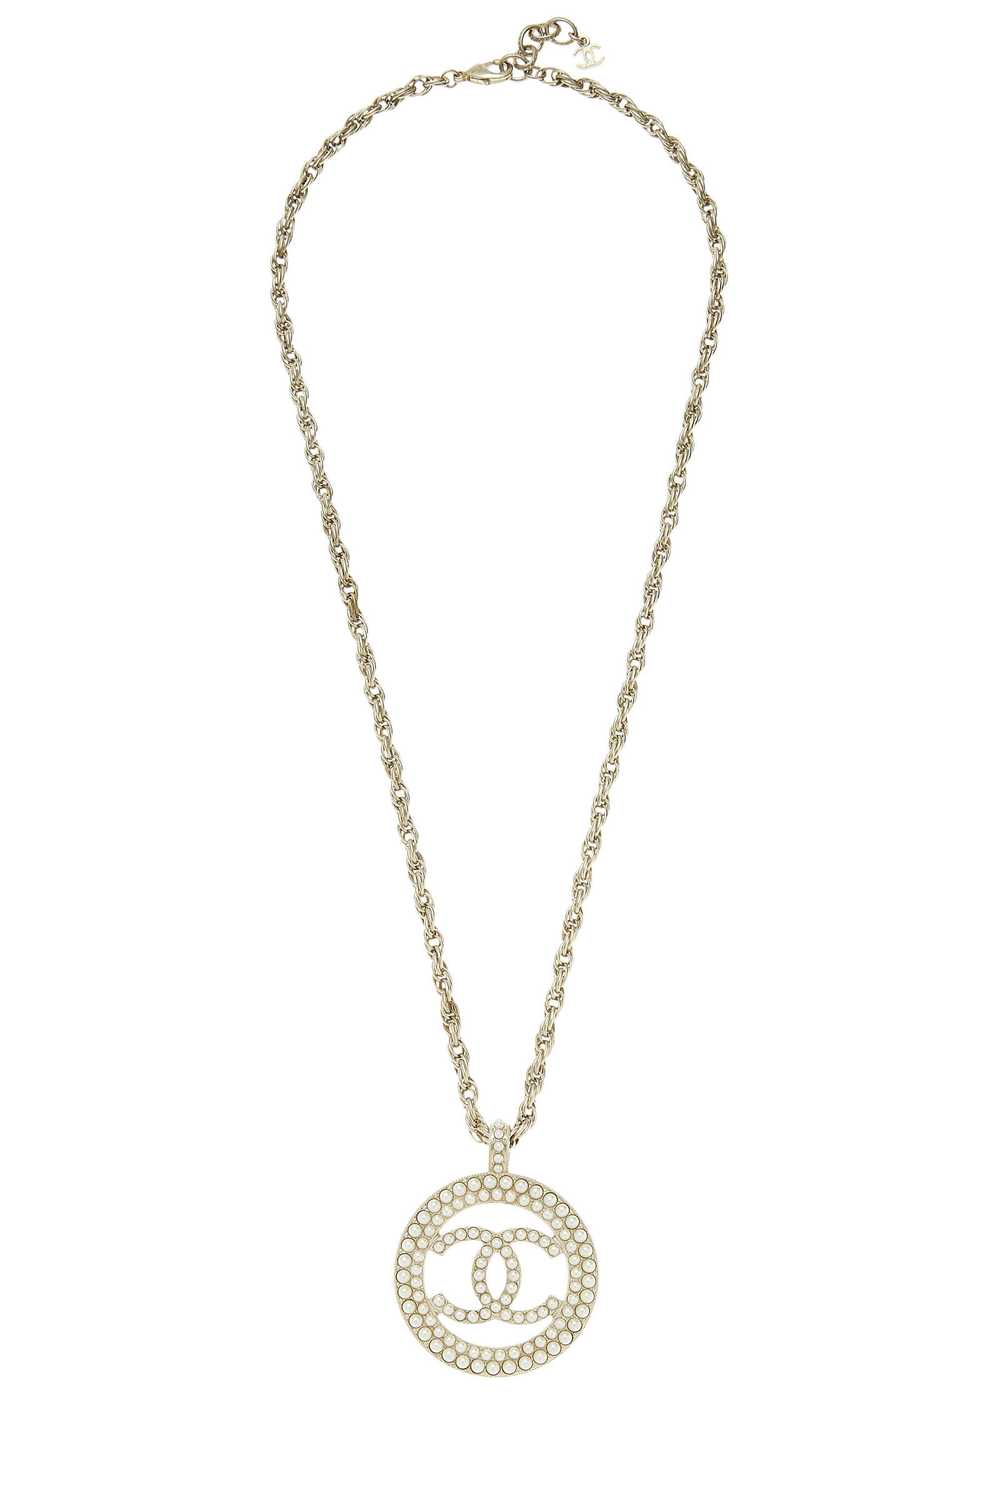 Gold & White Faux Pearl 'CC' Necklace - image 1